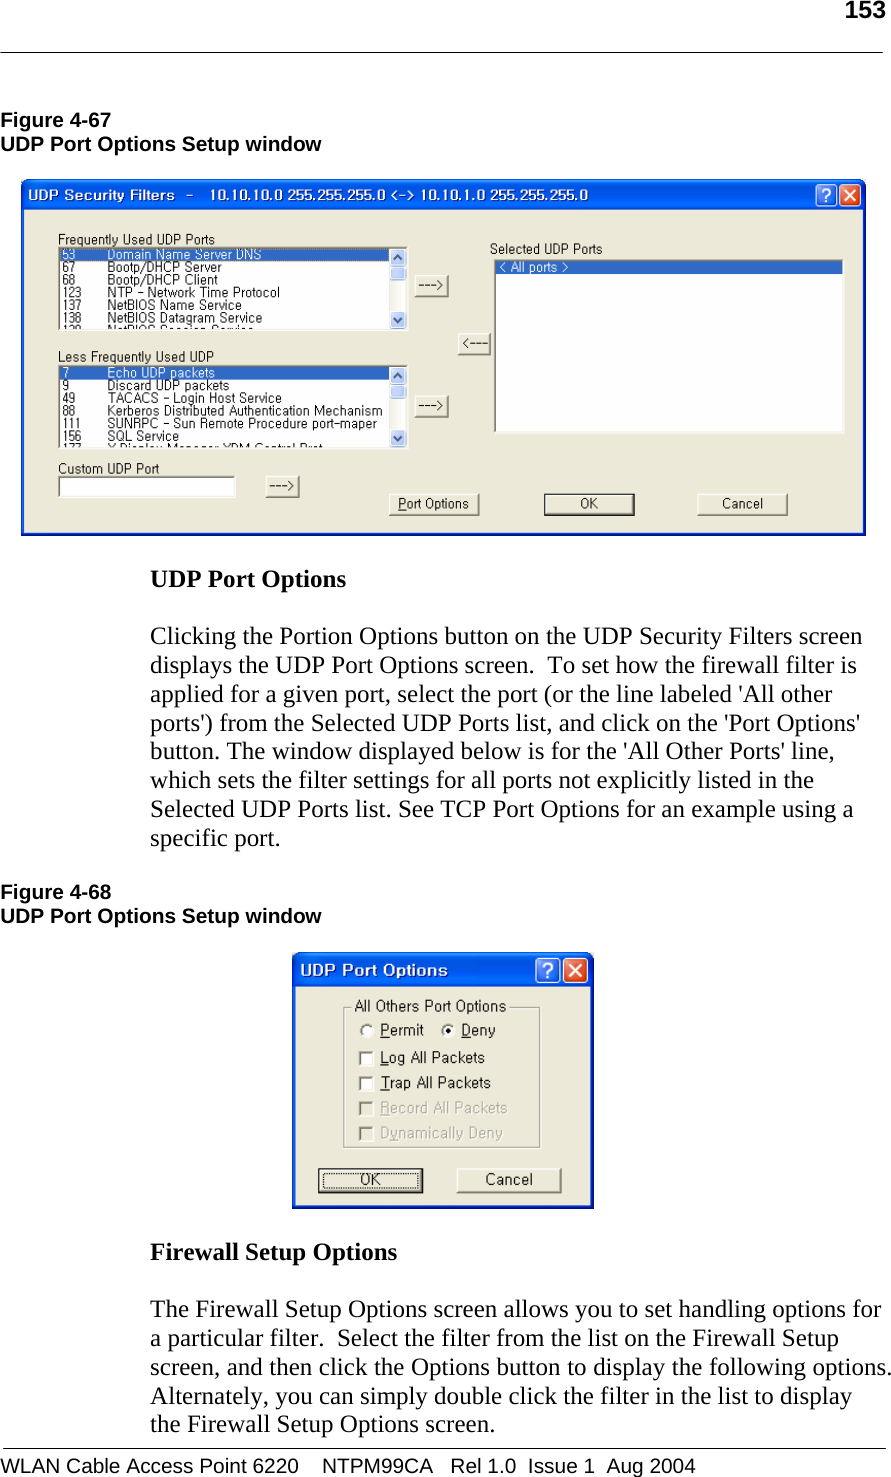   153  Figure 4-67 UDP Port Options Setup window    UDP Port Options   Clicking the Portion Options button on the UDP Security Filters screen displays the UDP Port Options screen.  To set how the firewall filter is applied for a given port, select the port (or the line labeled &apos;All other ports&apos;) from the Selected UDP Ports list, and click on the &apos;Port Options&apos; button. The window displayed below is for the &apos;All Other Ports&apos; line, which sets the filter settings for all ports not explicitly listed in the Selected UDP Ports list. See TCP Port Options for an example using a specific port.  Figure 4-68 UDP Port Options Setup window    Firewall Setup Options   The Firewall Setup Options screen allows you to set handling options for a particular filter.  Select the filter from the list on the Firewall Setup screen, and then click the Options button to display the following options. Alternately, you can simply double click the filter in the list to display the Firewall Setup Options screen. WLAN Cable Access Point 6220    NTPM99CA   Rel 1.0  Issue 1  Aug 2004 